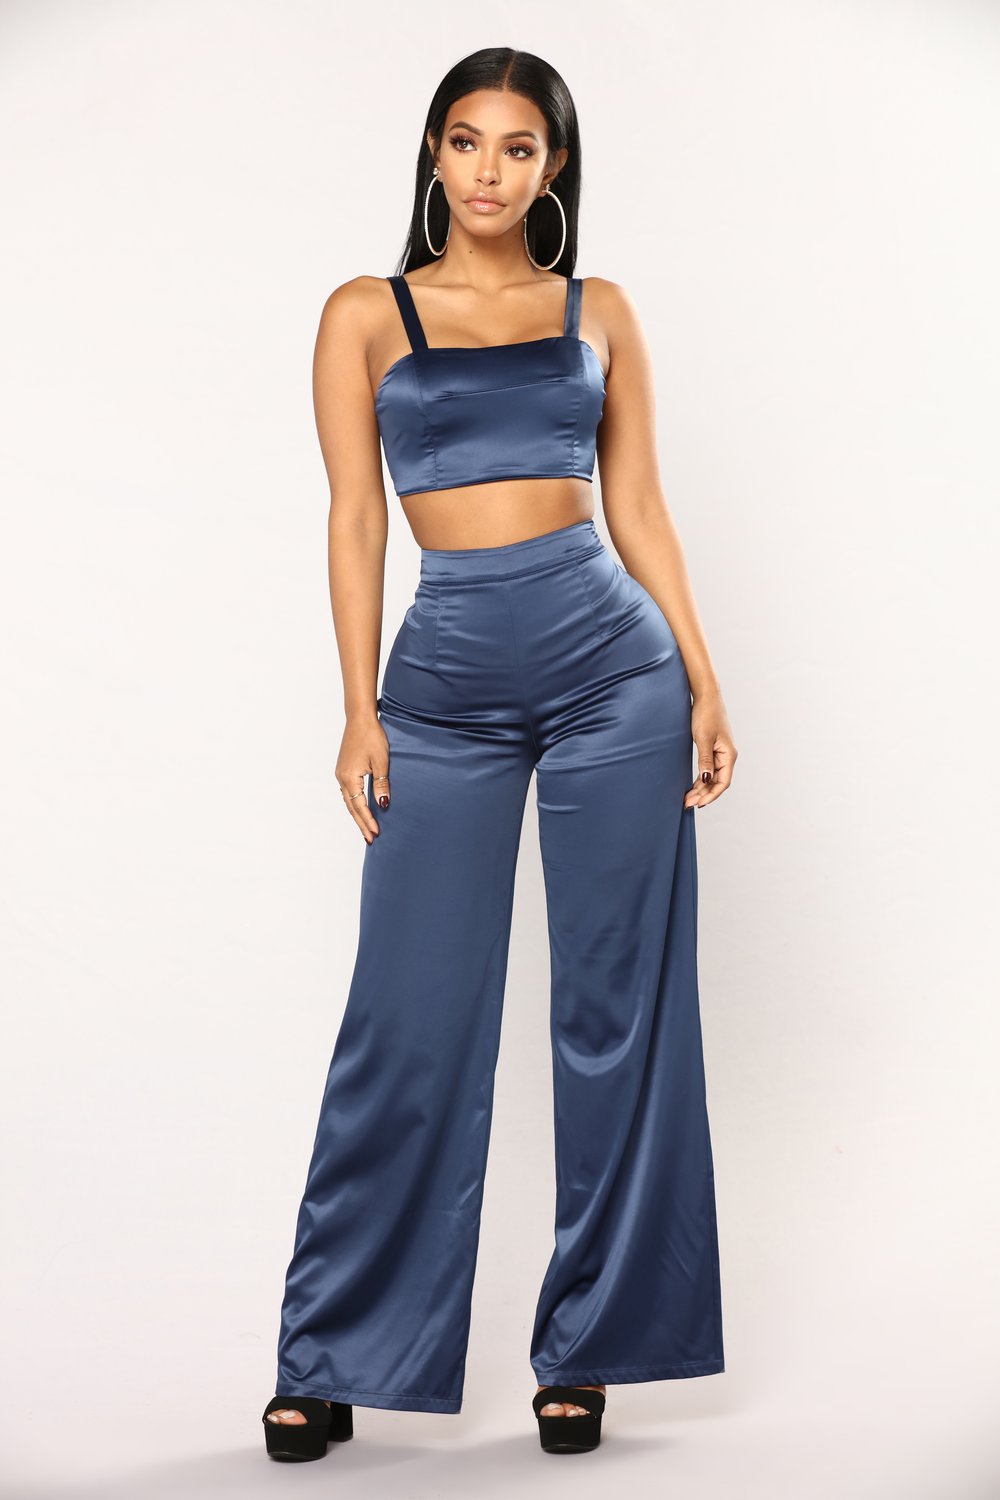 Valentine's Day Date Outfit Ideas From Fashion Nova - Frugal ...